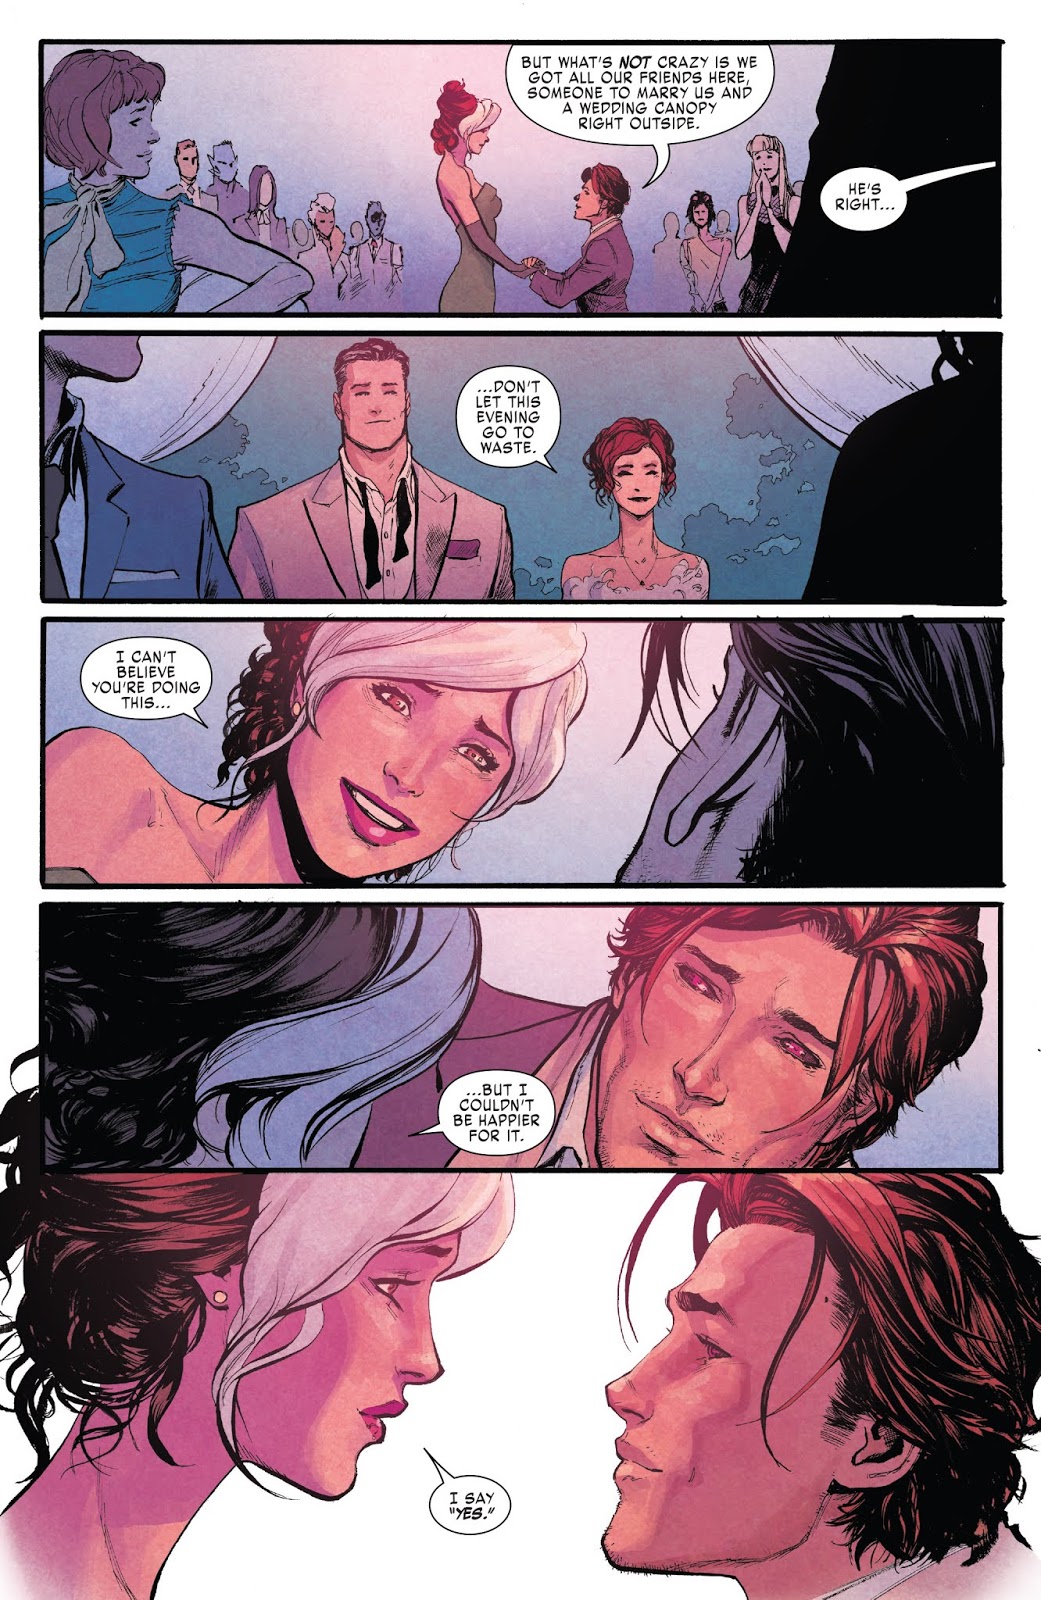 Gambit Proposes To Rogue